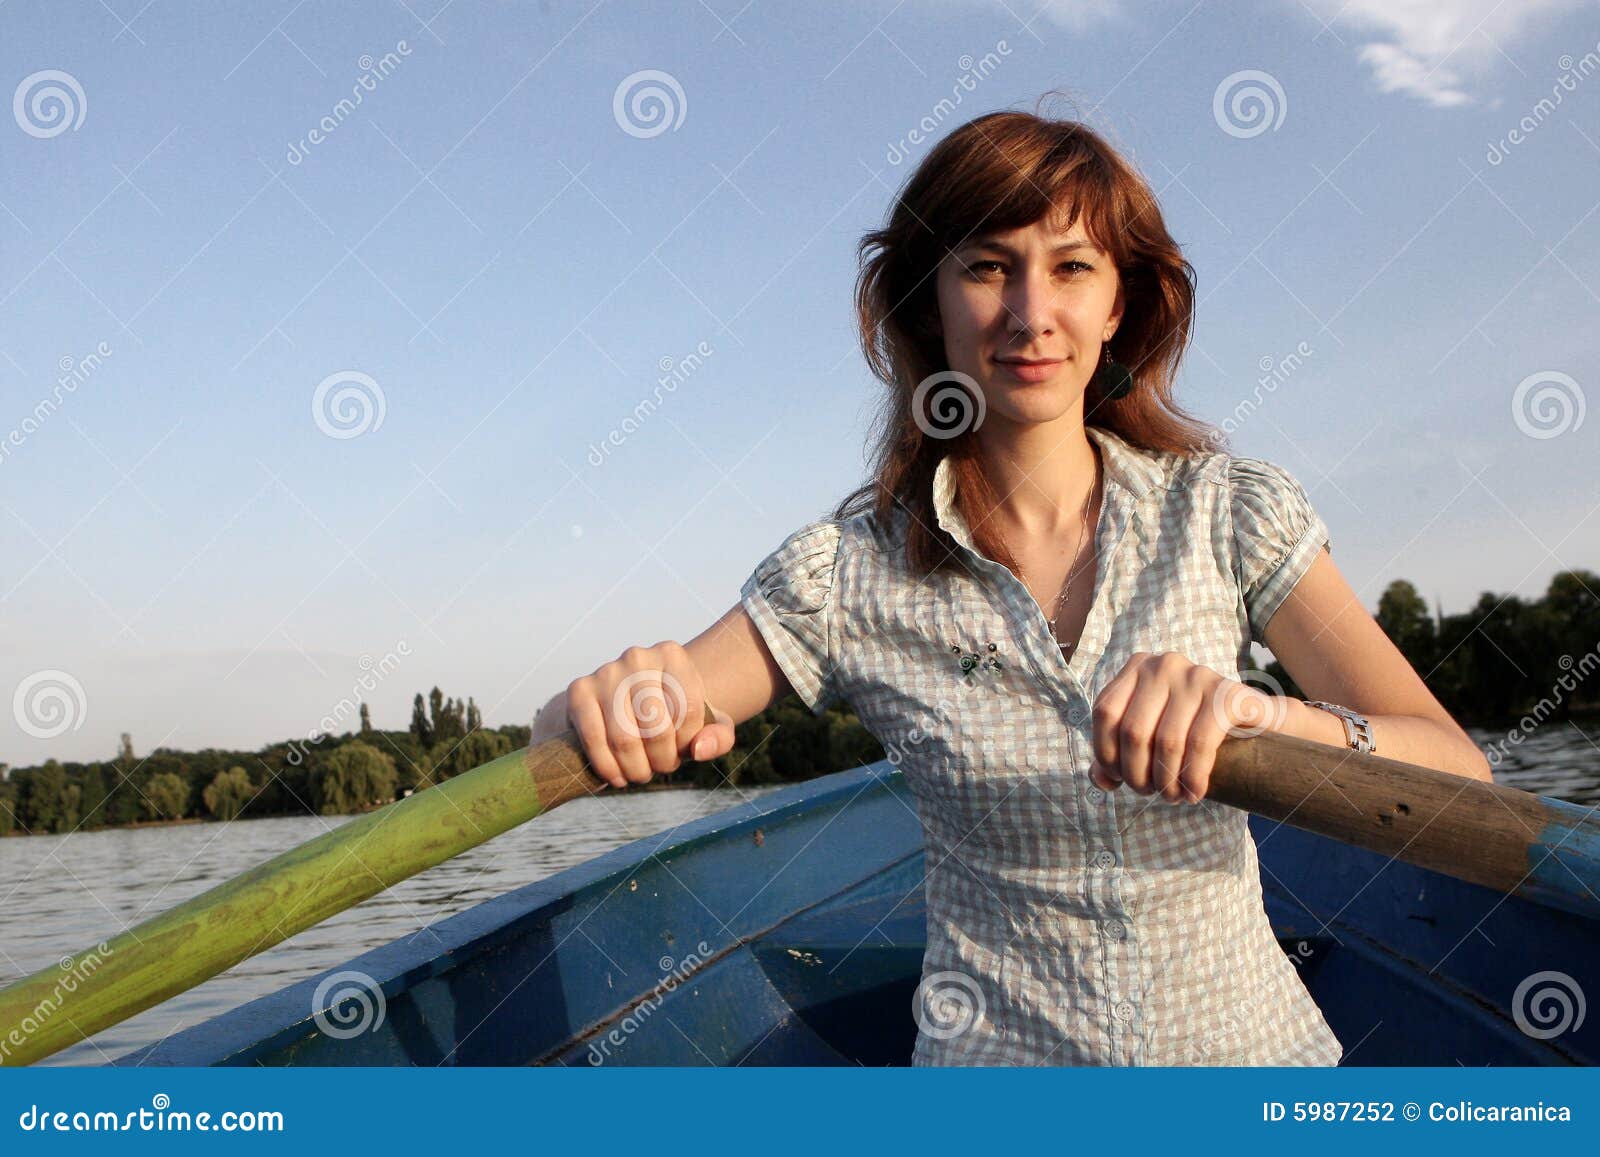 girl rowing a boat stock photo. image of teenager, light